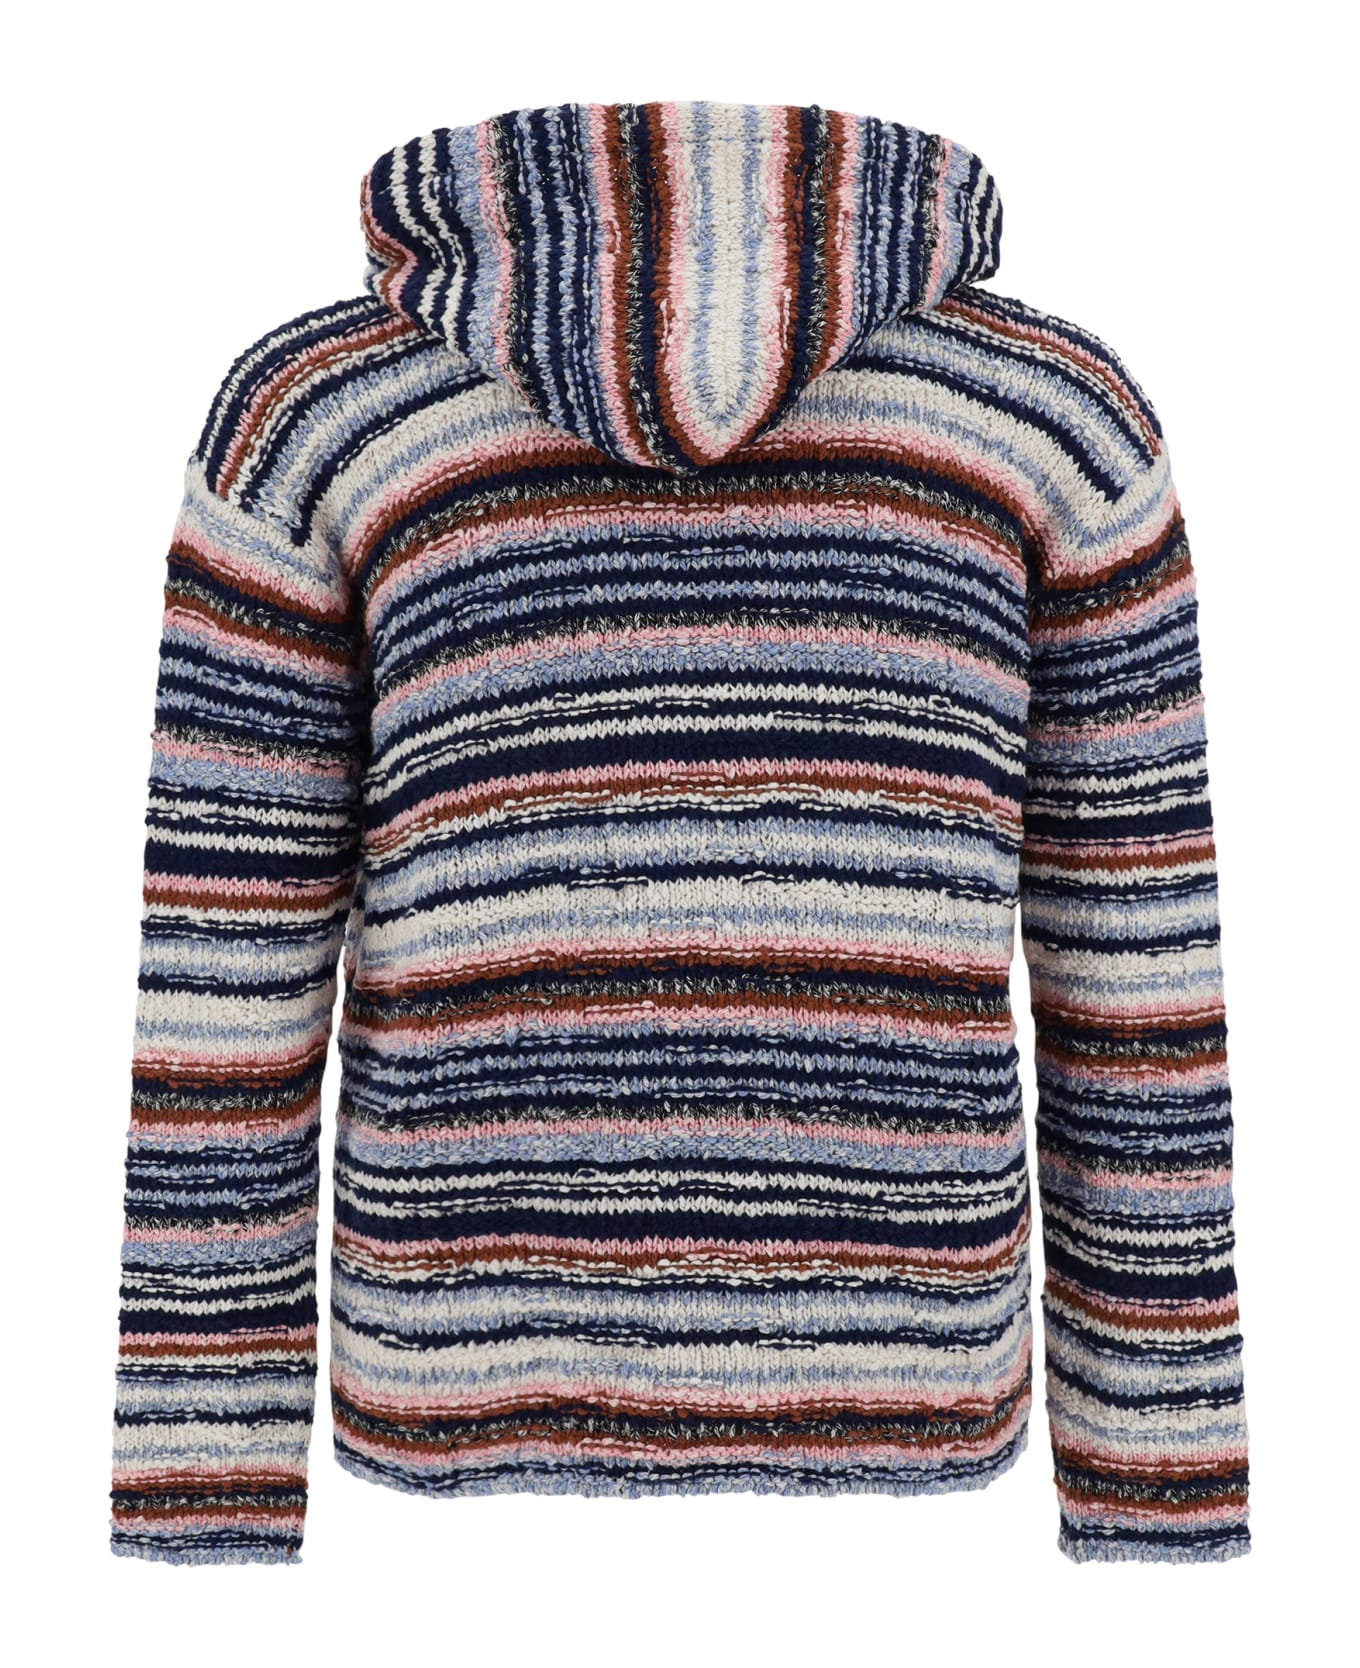 Marni Hooded Sweater - Gnawed Blue